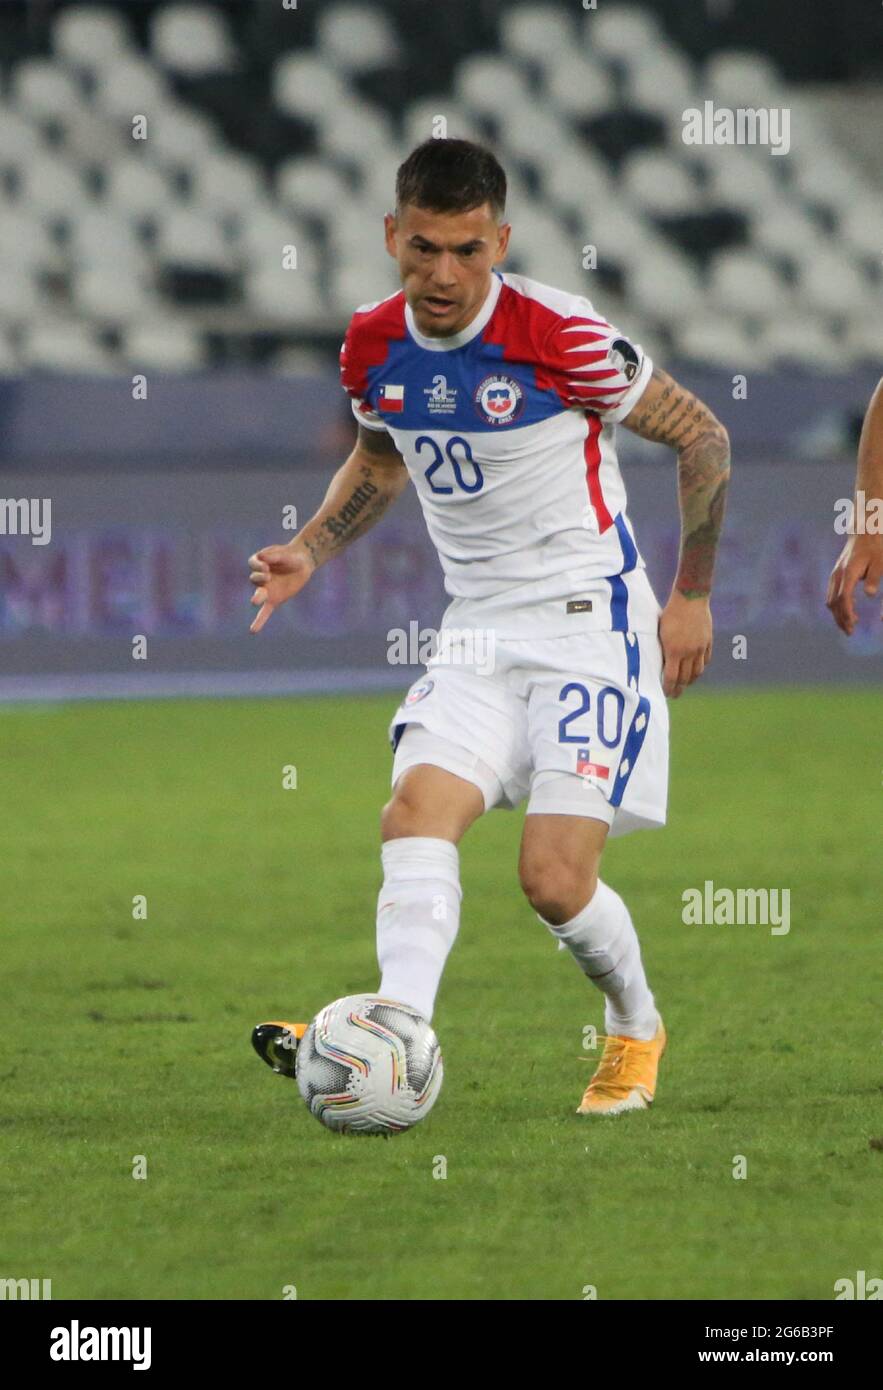 C. Aránguiz of Chili of Chili during the Copa America 2021, quarter final football  match between Brazil and Chile on July 3, 2021 at Olympic stadium in Rio de  Janeiro, Brazil. Photo